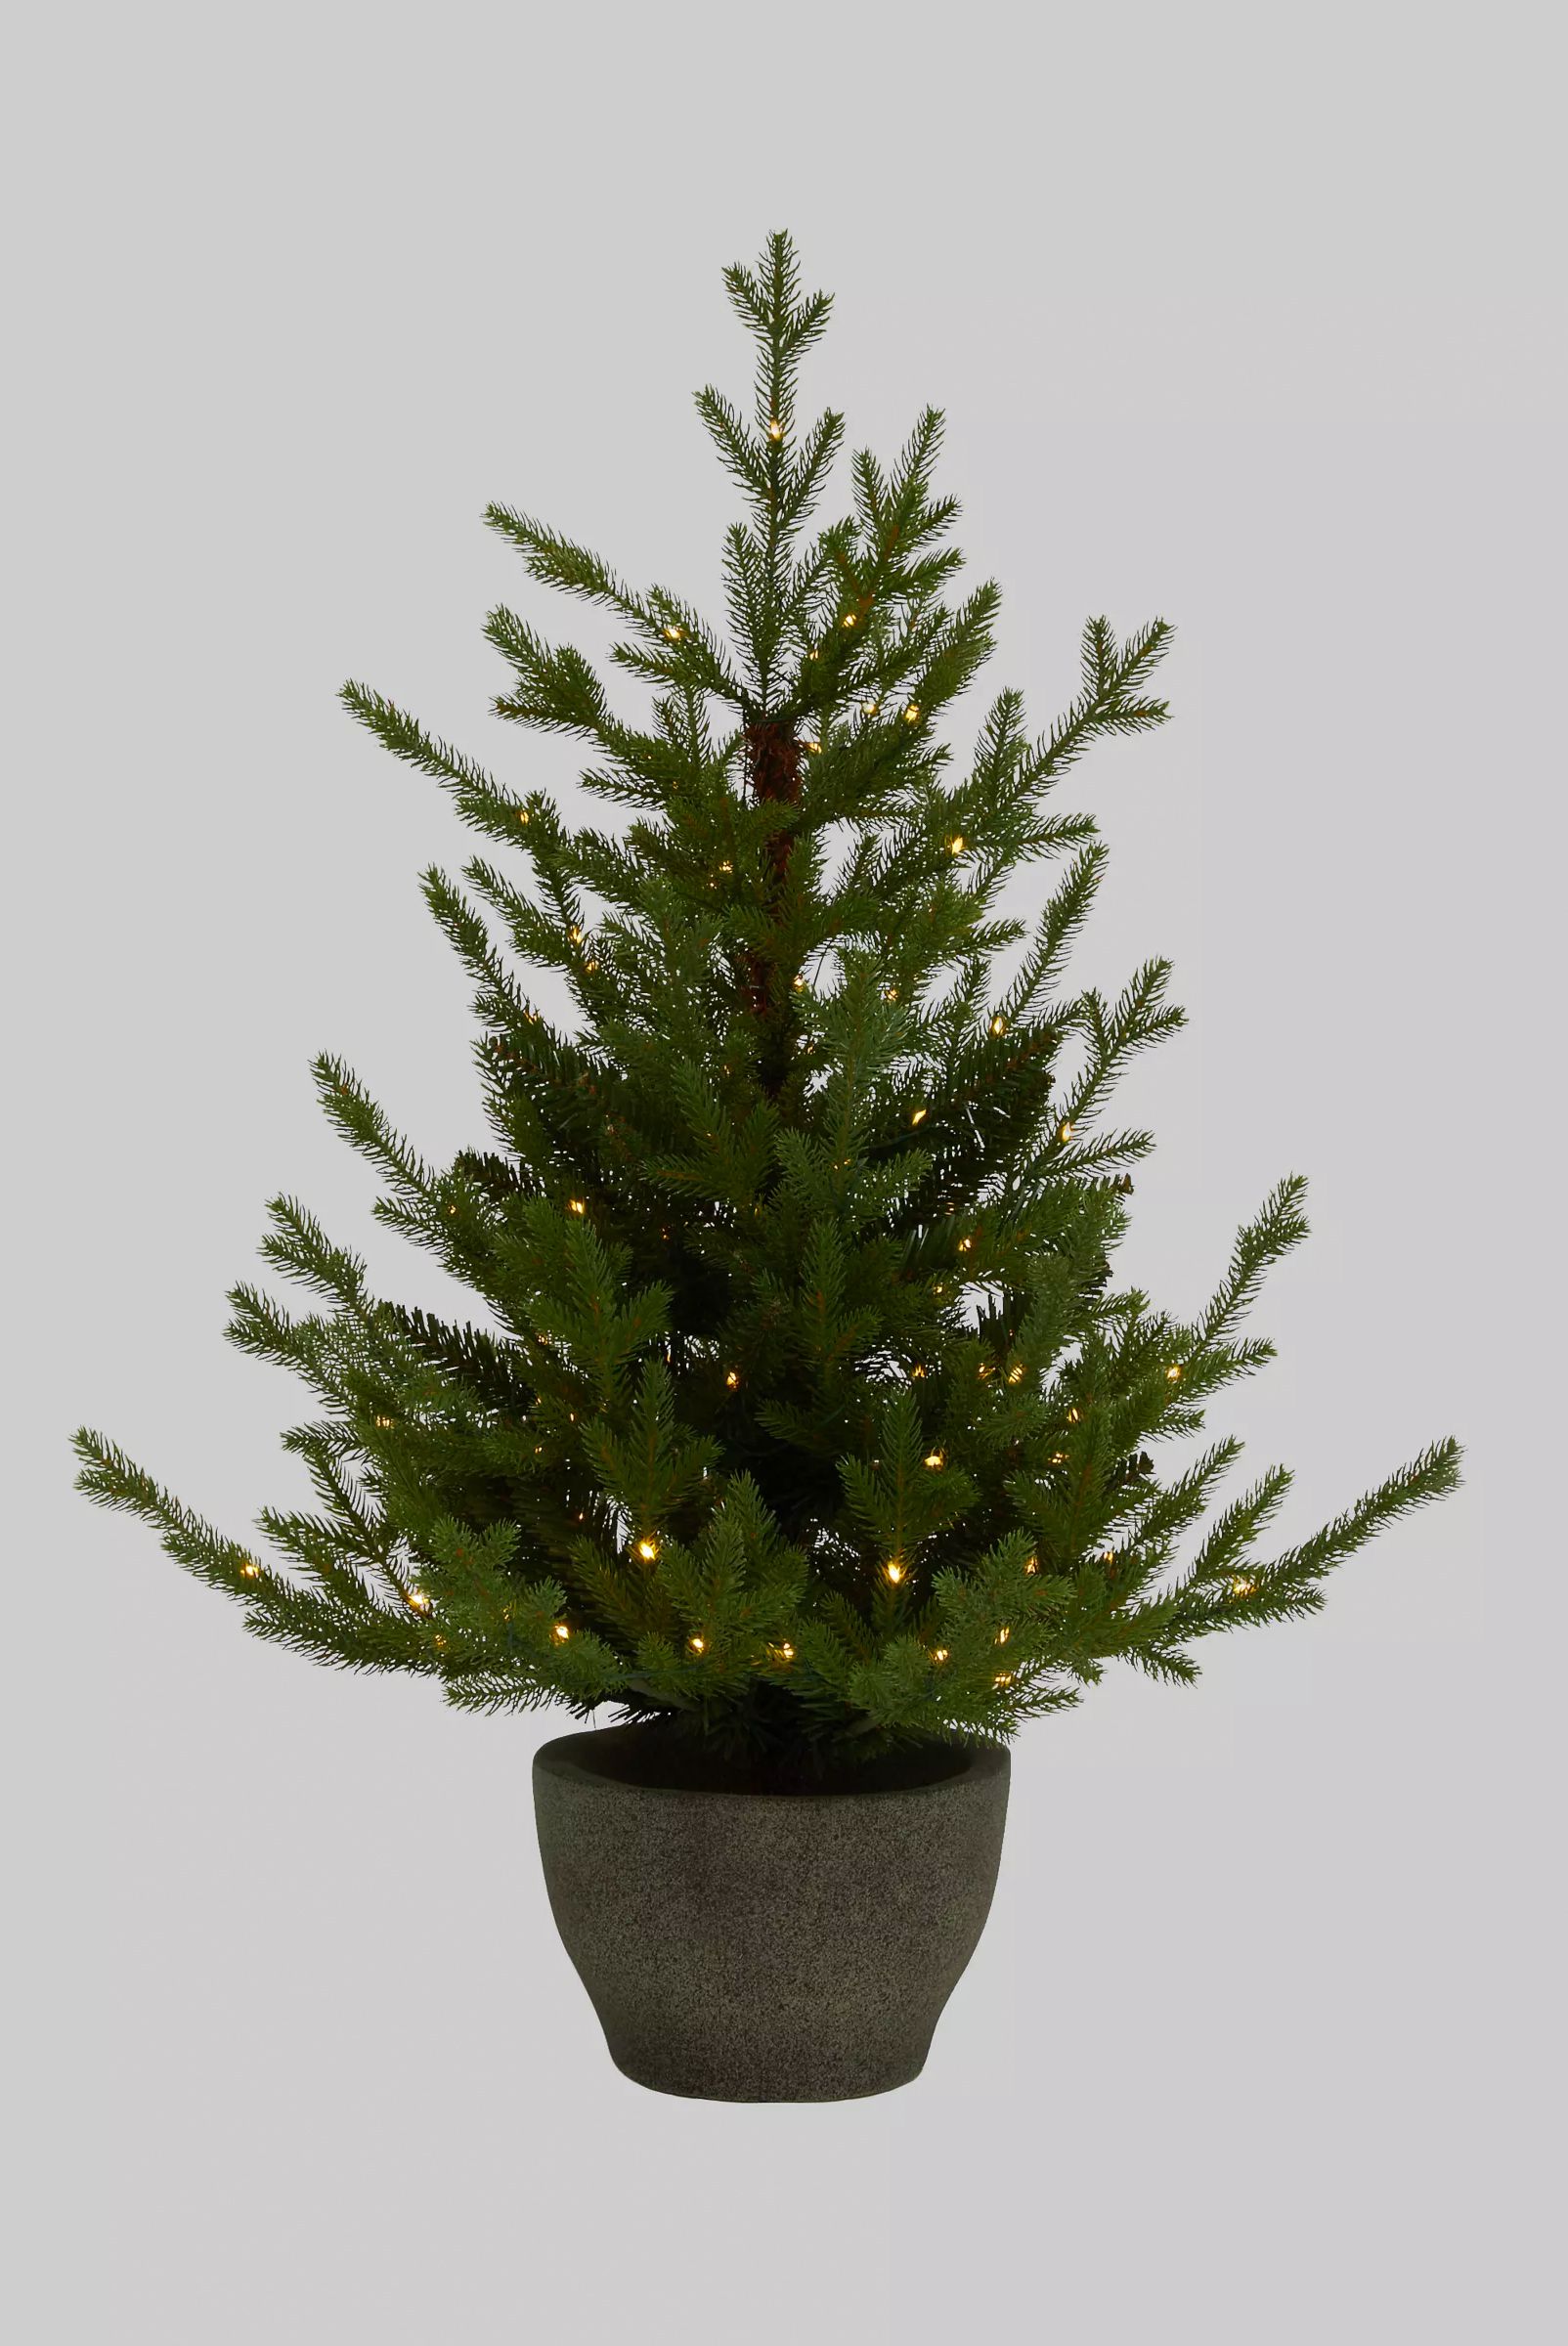 John Lewis Cotswold Potted Pre-lit Christmas Tree, 3ft, £89; John Lewis Pre-lit Christmas Tree in Zinc Bucket, 3ft, £45; John Lewis Fireside Unlit Christmas Tree, 4ft, £45